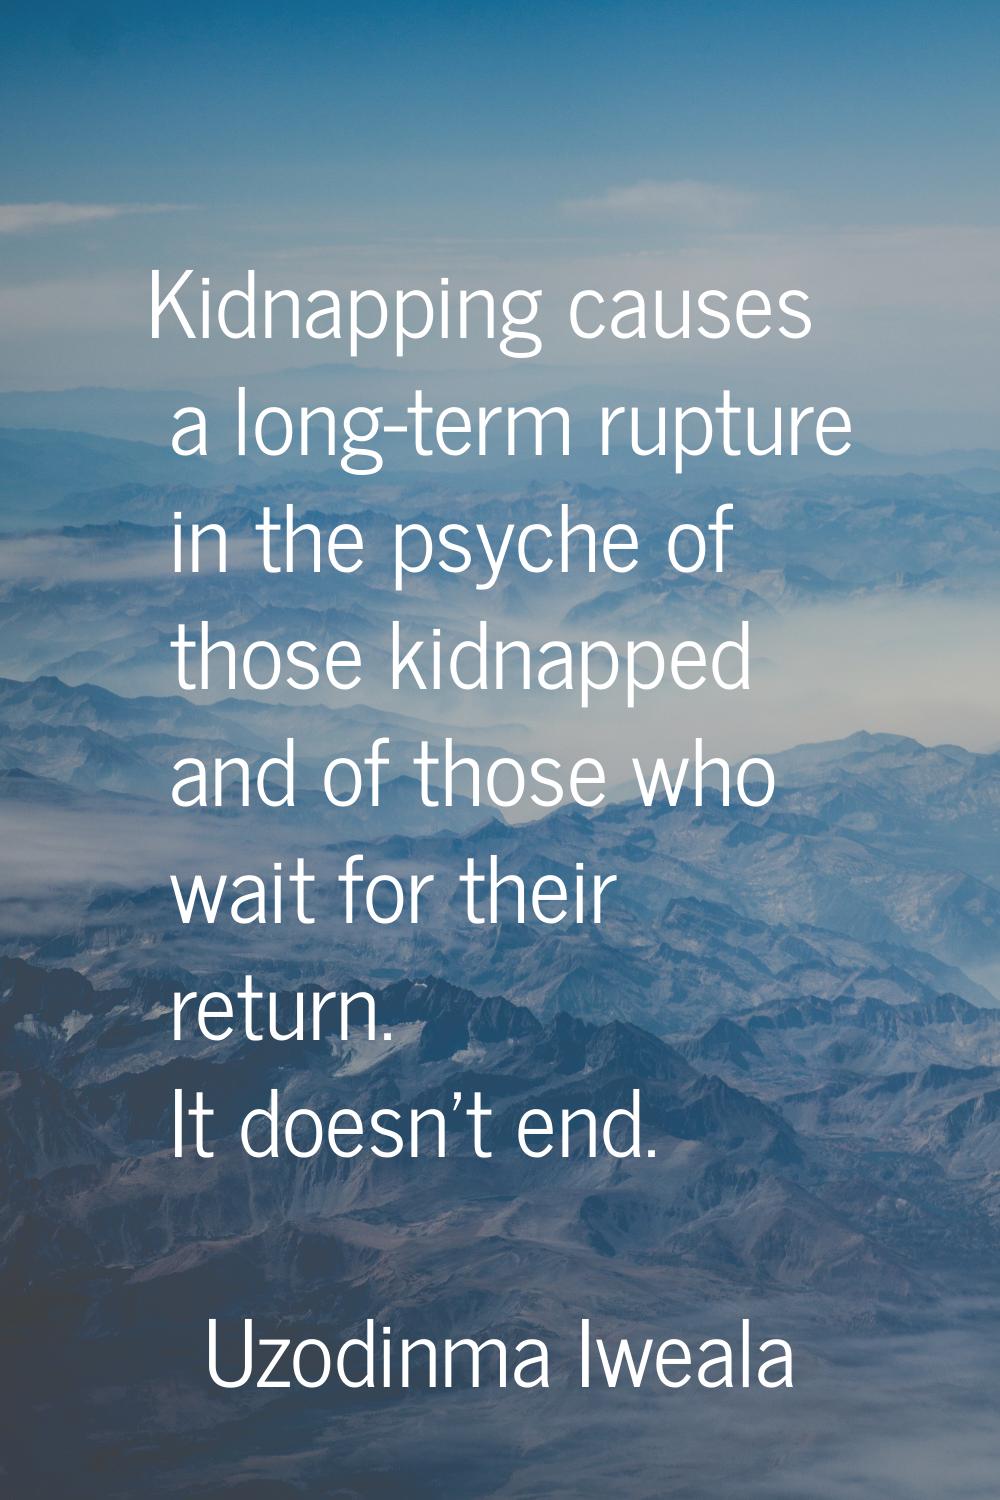 Kidnapping causes a long-term rupture in the psyche of those kidnapped and of those who wait for th